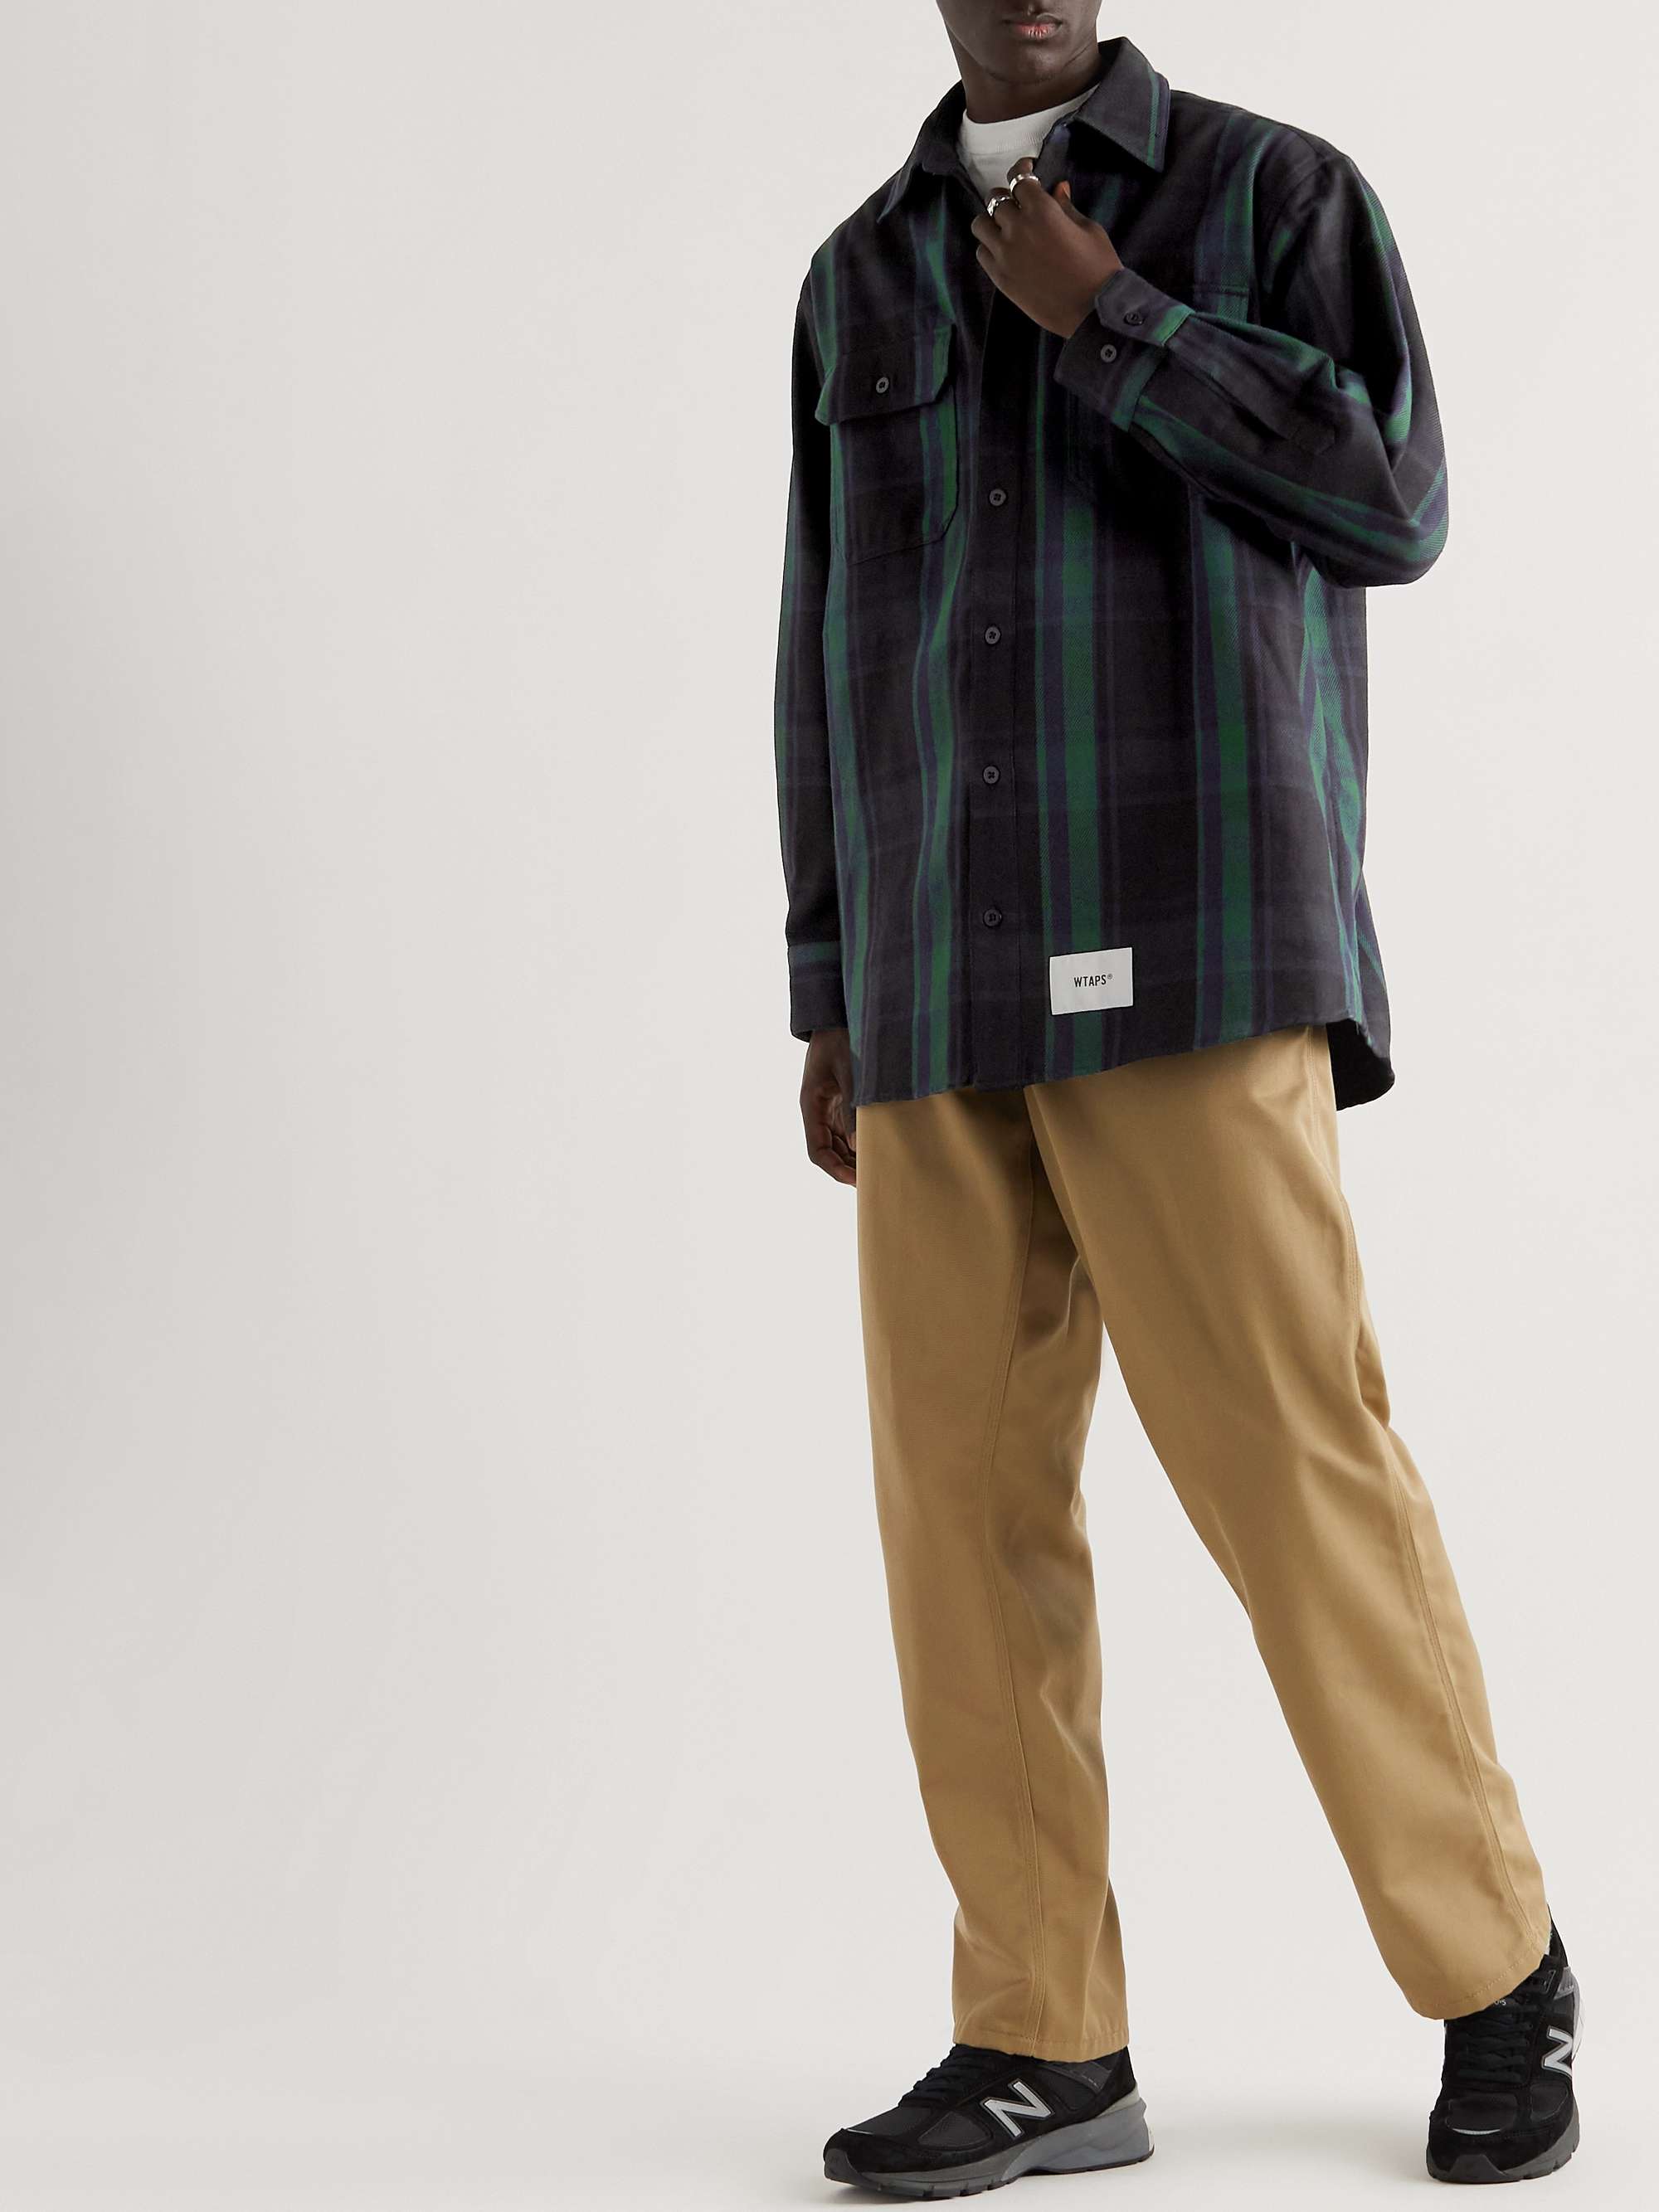 WTAPS 22AW DECK /LS / COTTON. FLANNEL即日発送可能です